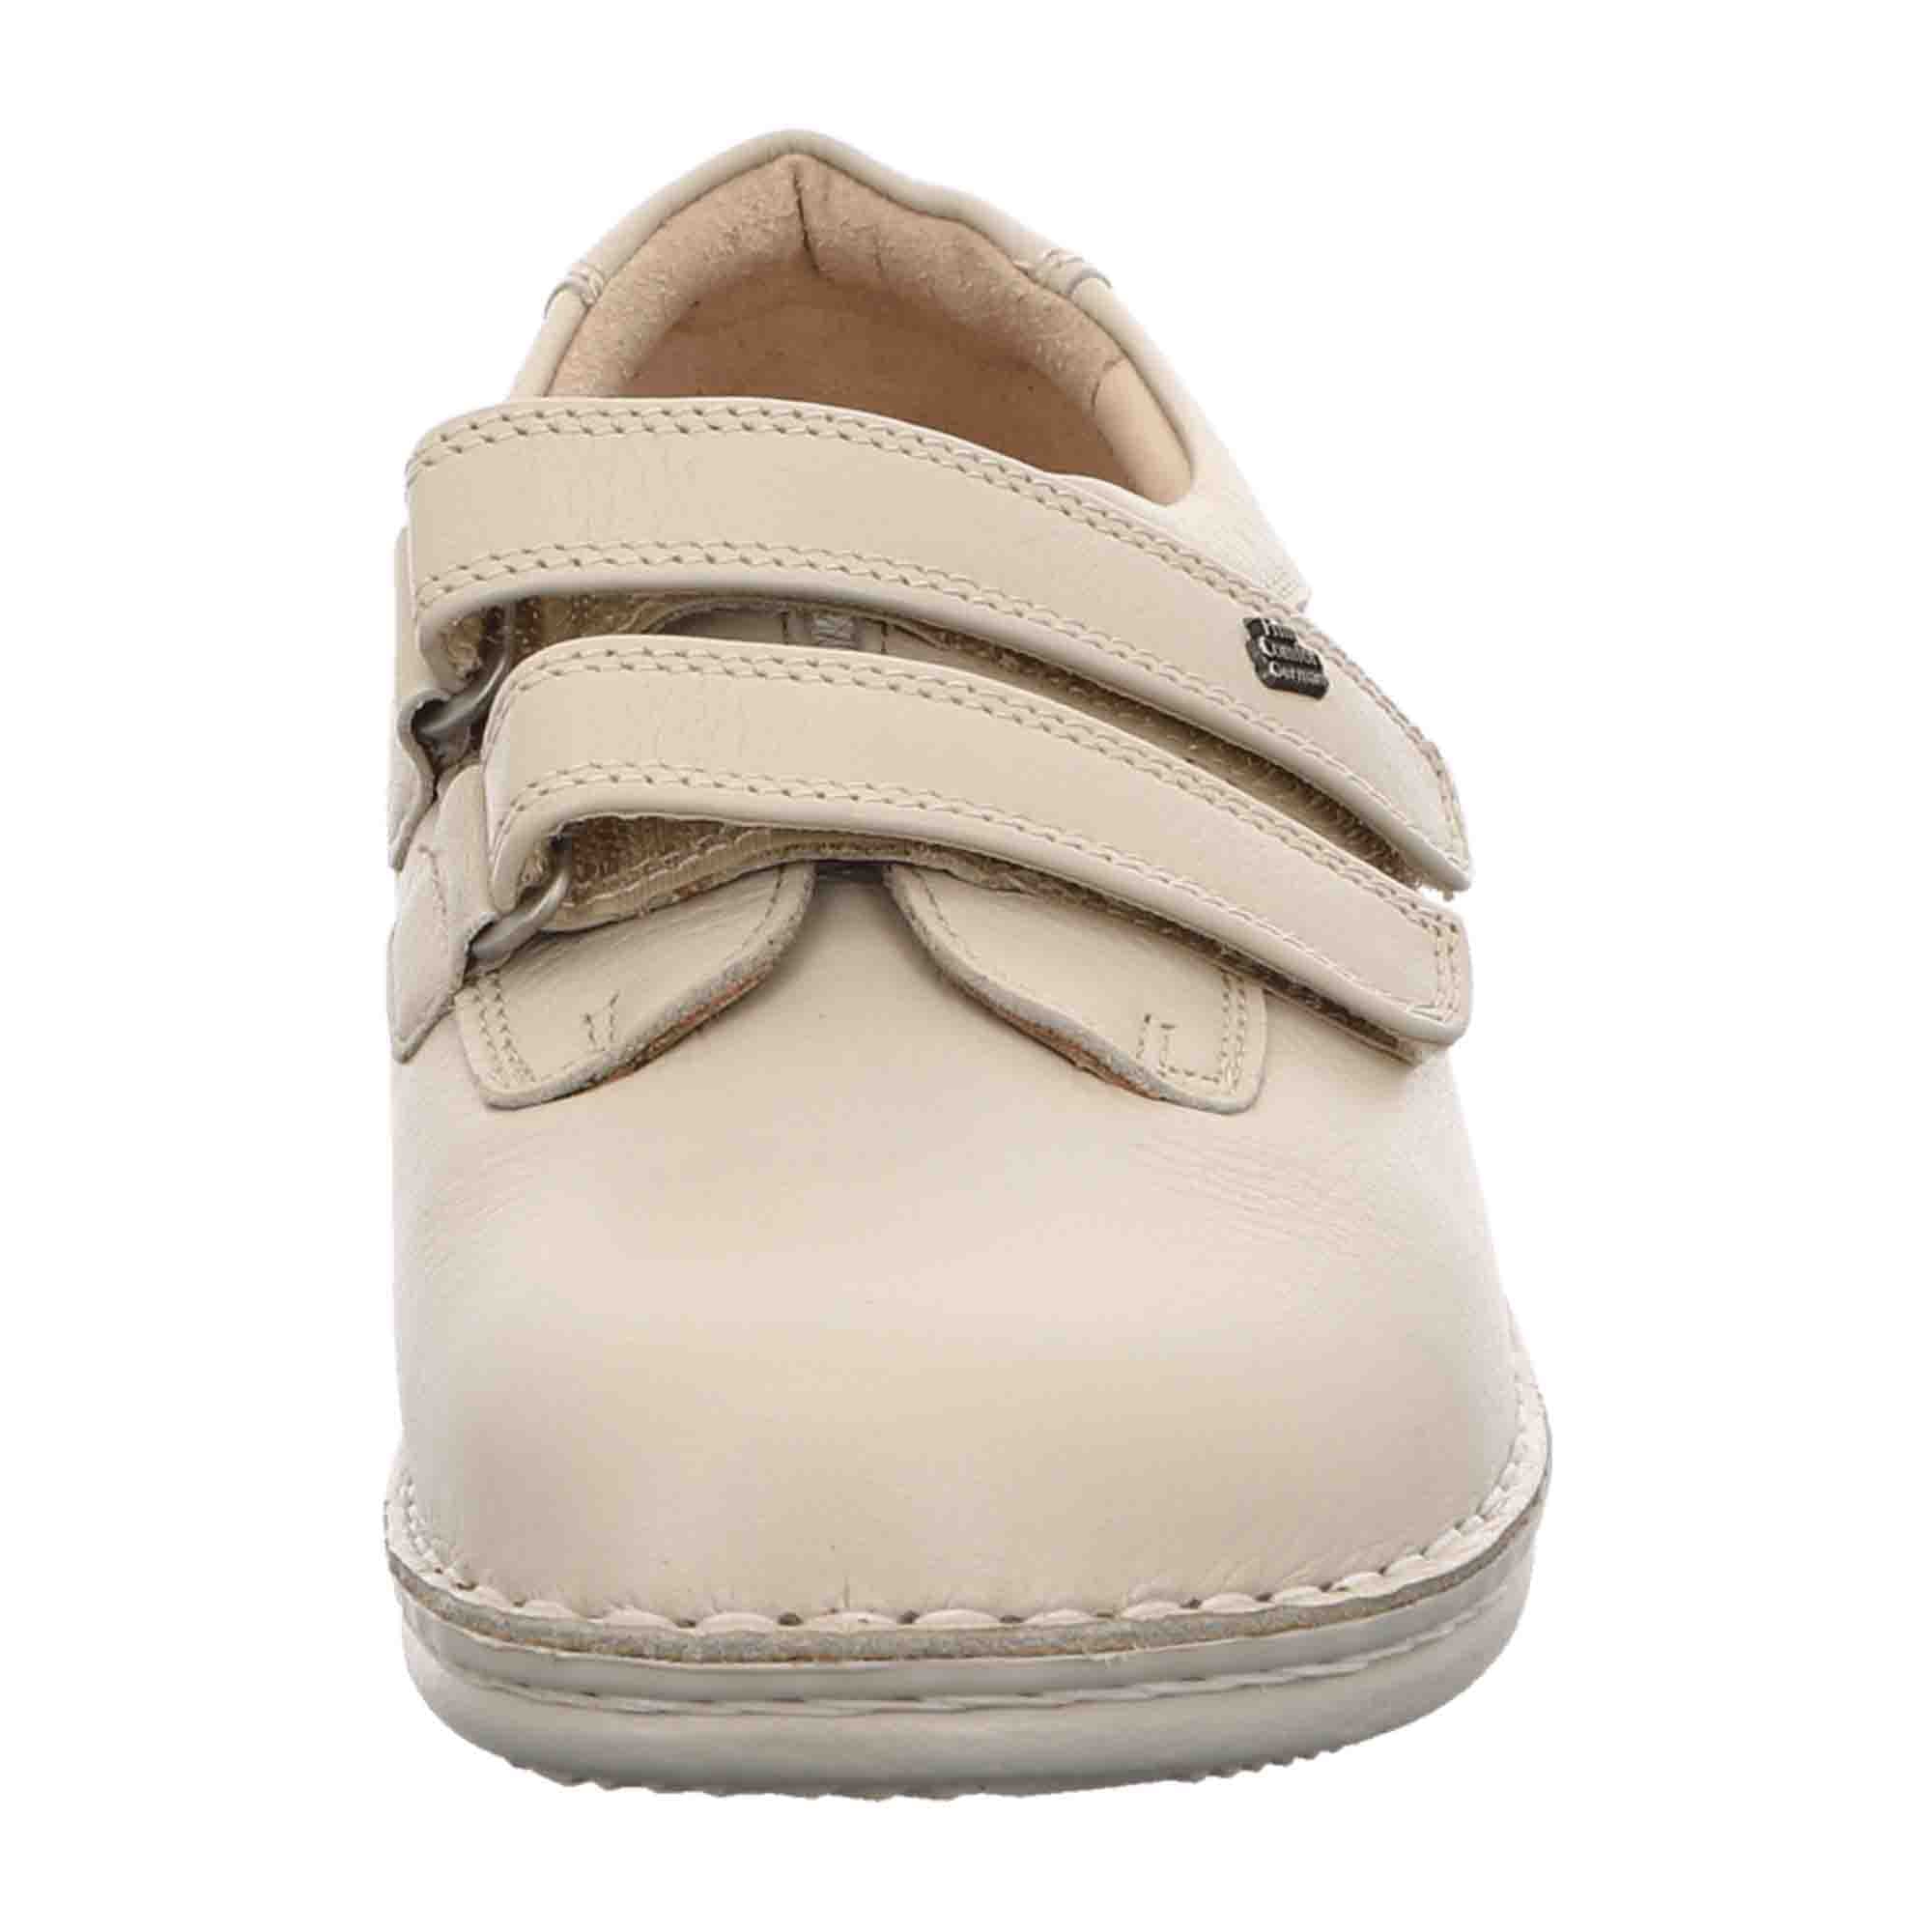 Finn Comfort Women's Therapeutic Shoes in Beige - Stylish & Durable